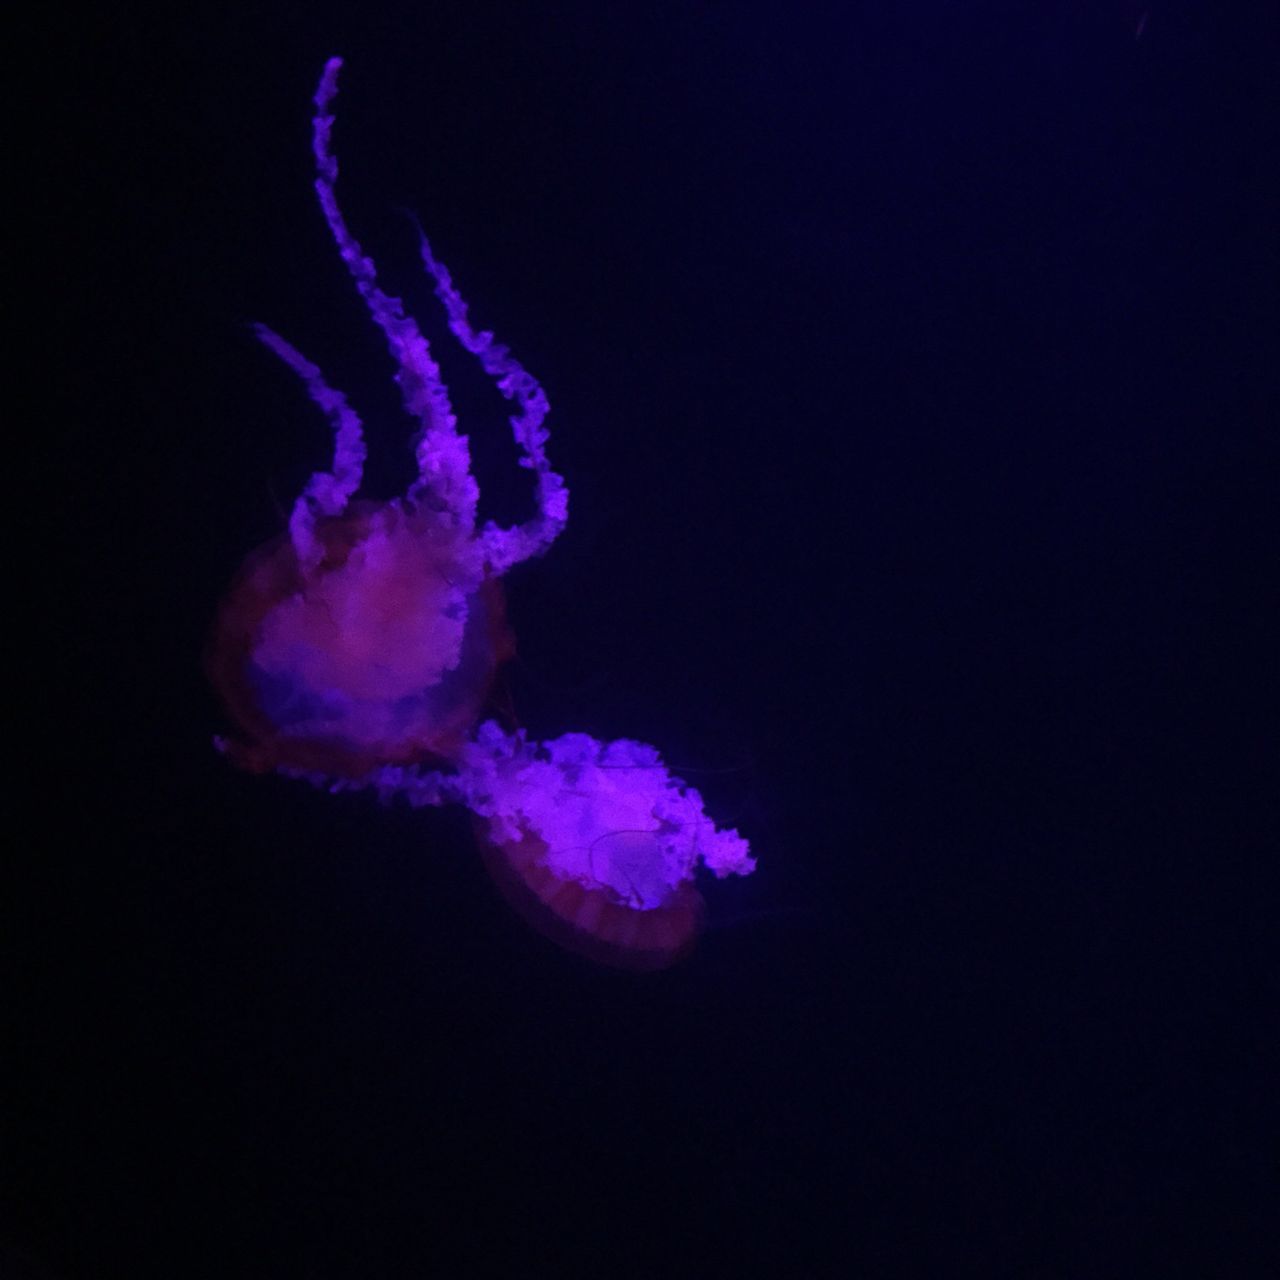 animal themes, underwater, sea life, swimming, blue, wildlife, animals in the wild, jellyfish, undersea, one animal, copy space, beauty in nature, night, water, studio shot, black background, fish, glowing, nature, no people